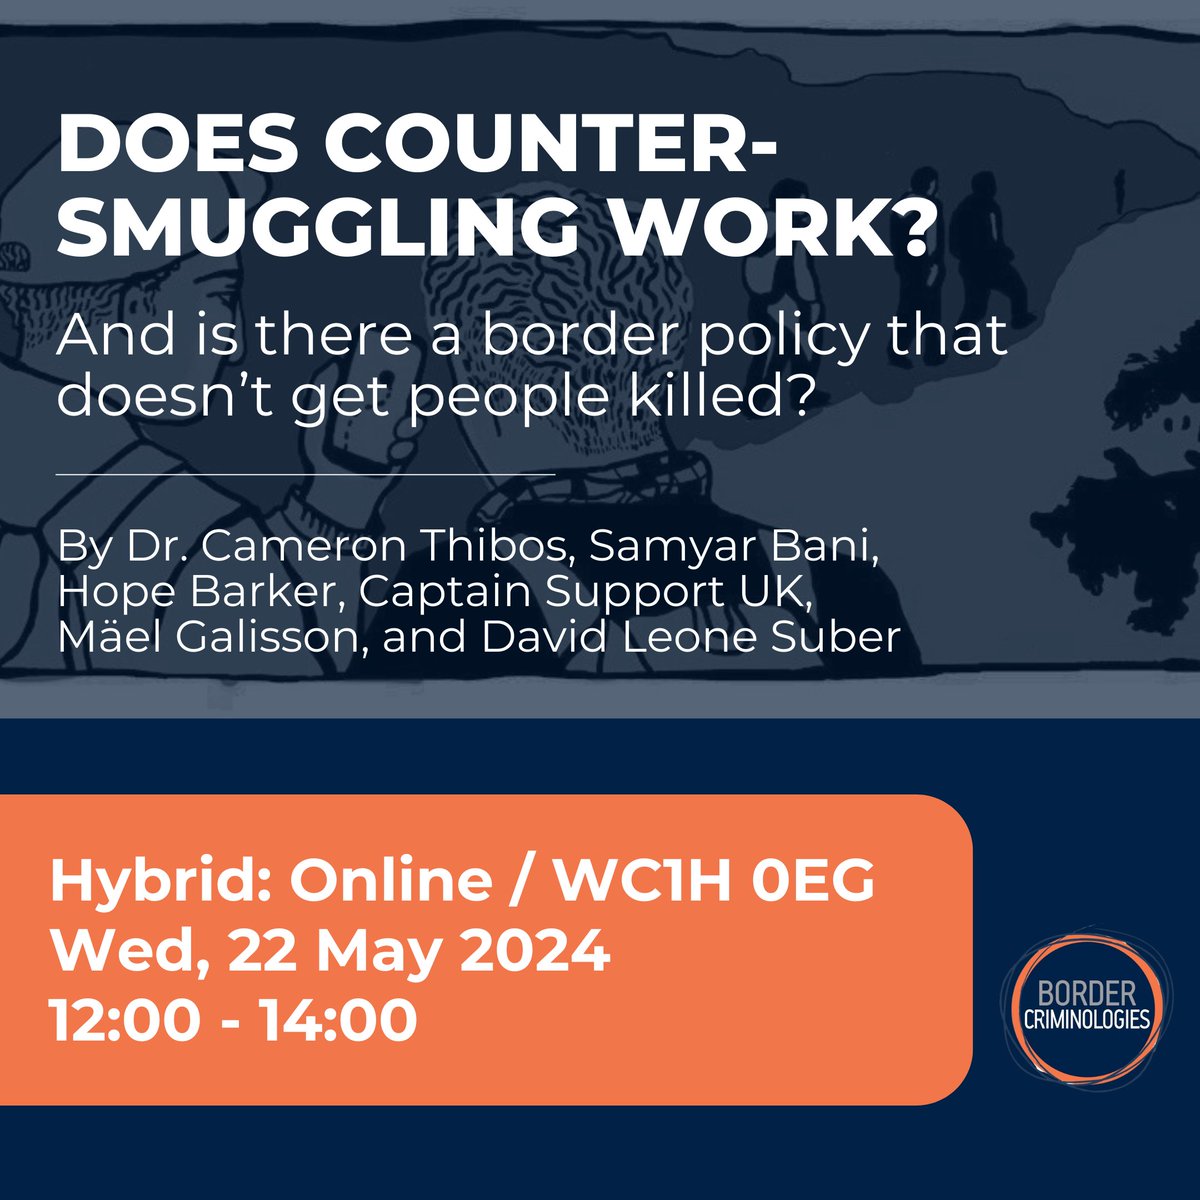 [New Event 🗓️] Join us for the seminar on border enforcement, migrant deaths, and humane policies amidst UK's plans to deport #asylumseekers to #Rwanda. Organised with @UCLCrimeScience & @BeyondSlavery, we explore the harmful impacts of counter-smuggling: law.ox.ac.uk/content/event/…